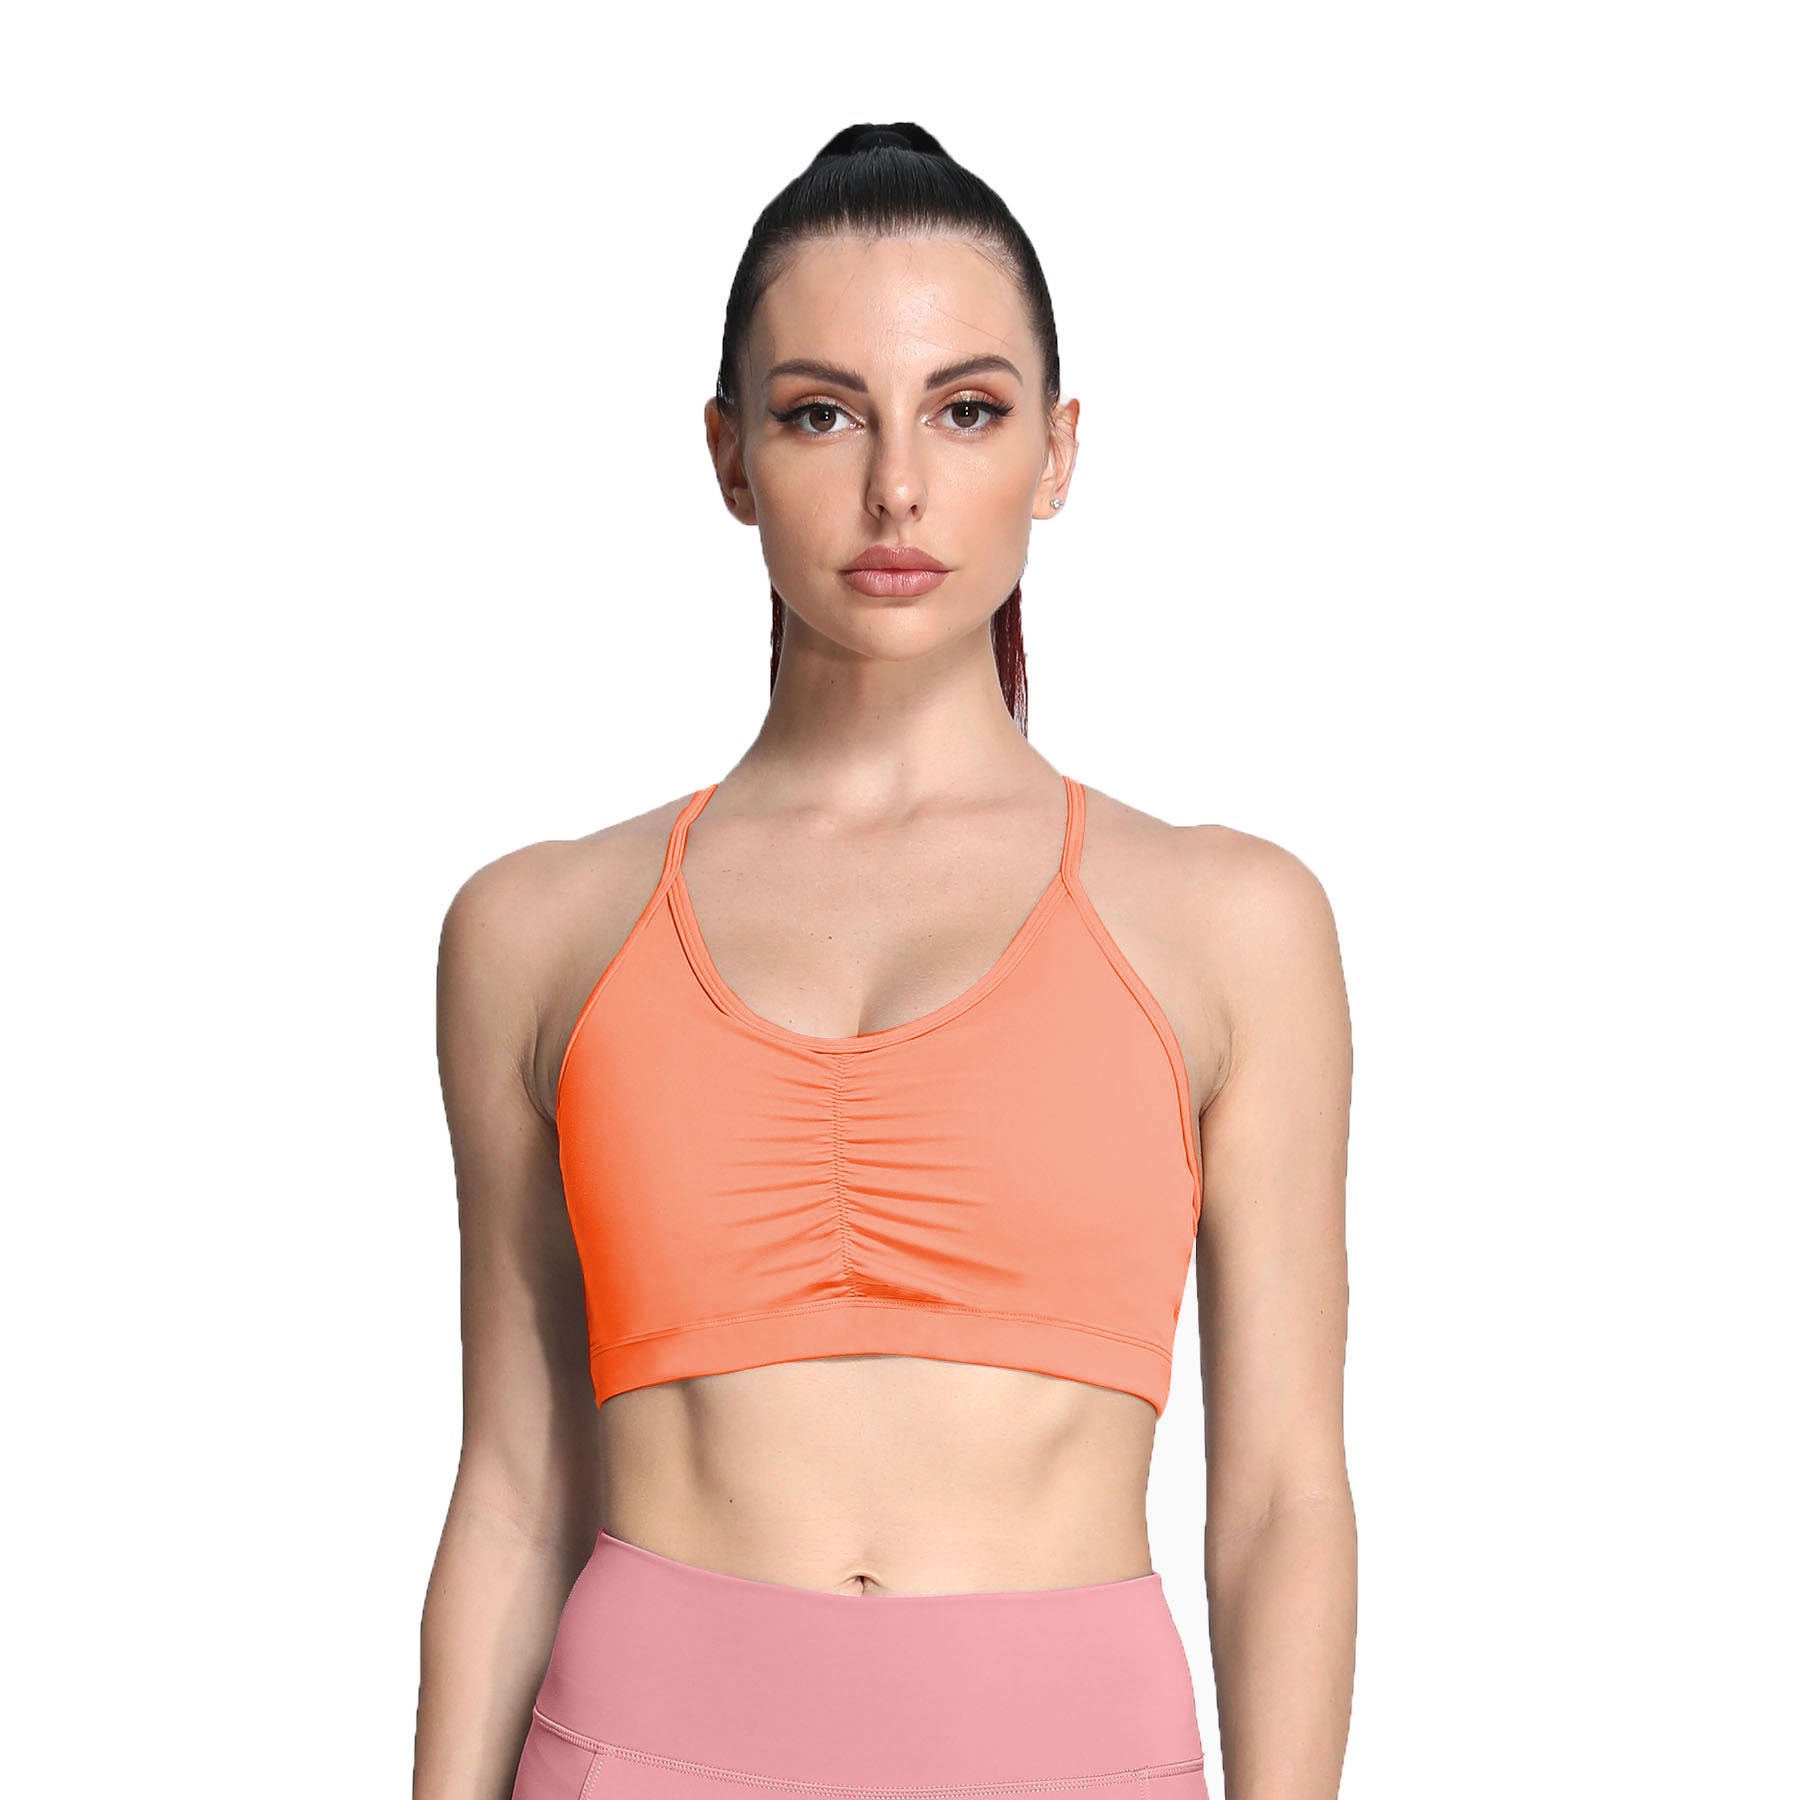 Aoxjox Ruched "Baddie" Sports Bra (CONT'D)